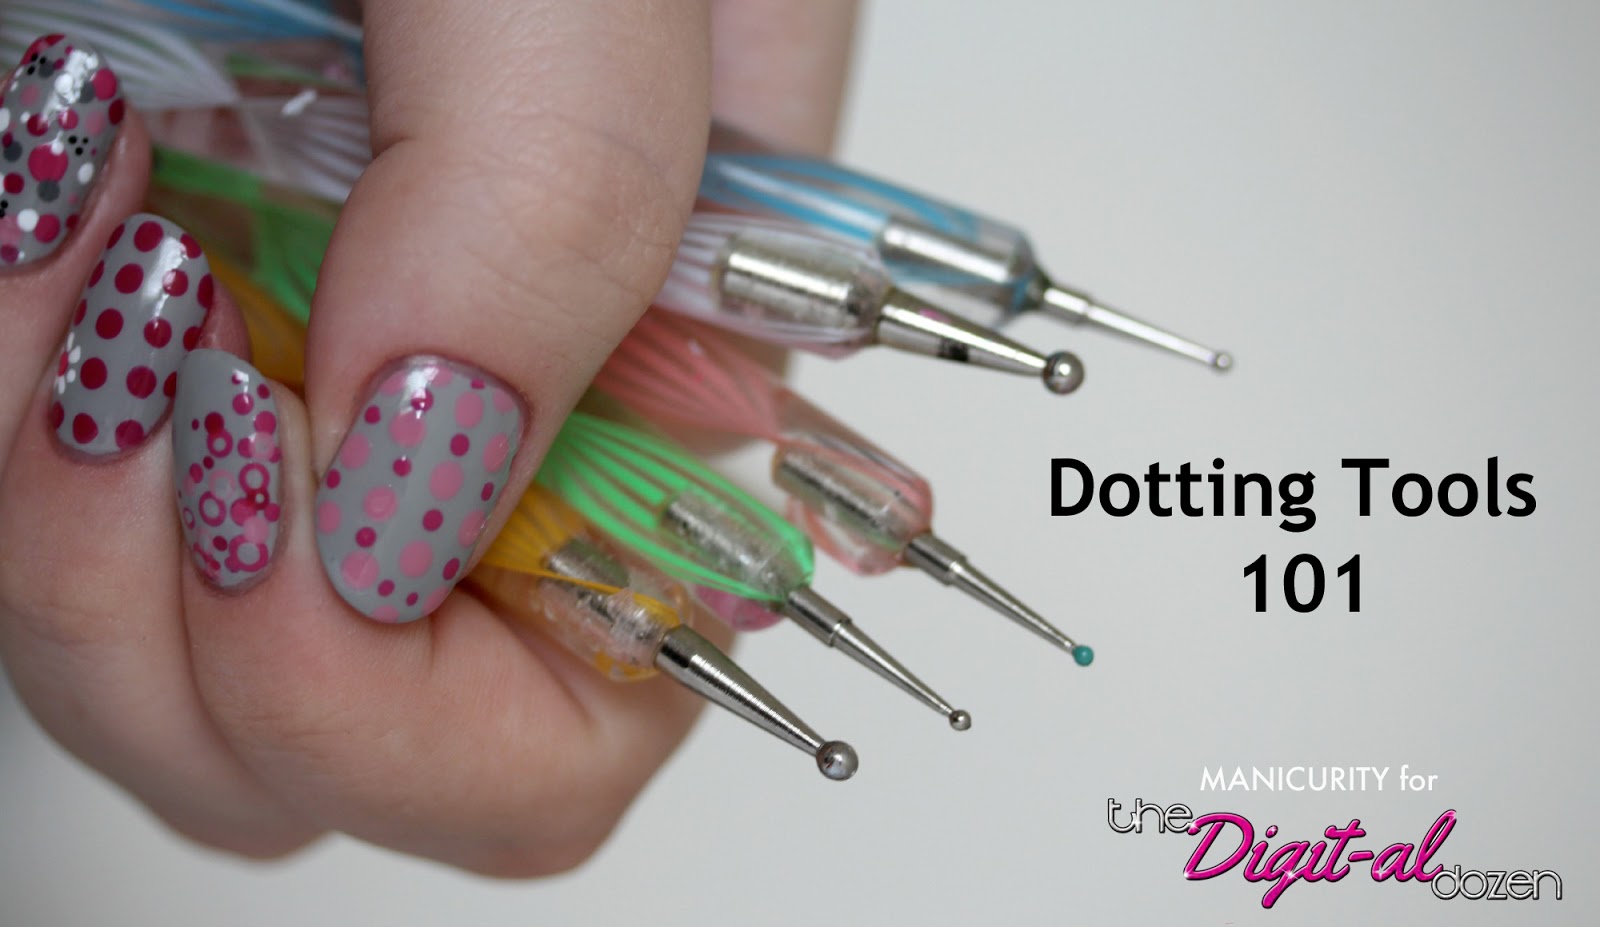 8. Nail Art Dotting Tool for Professional Use - wide 8